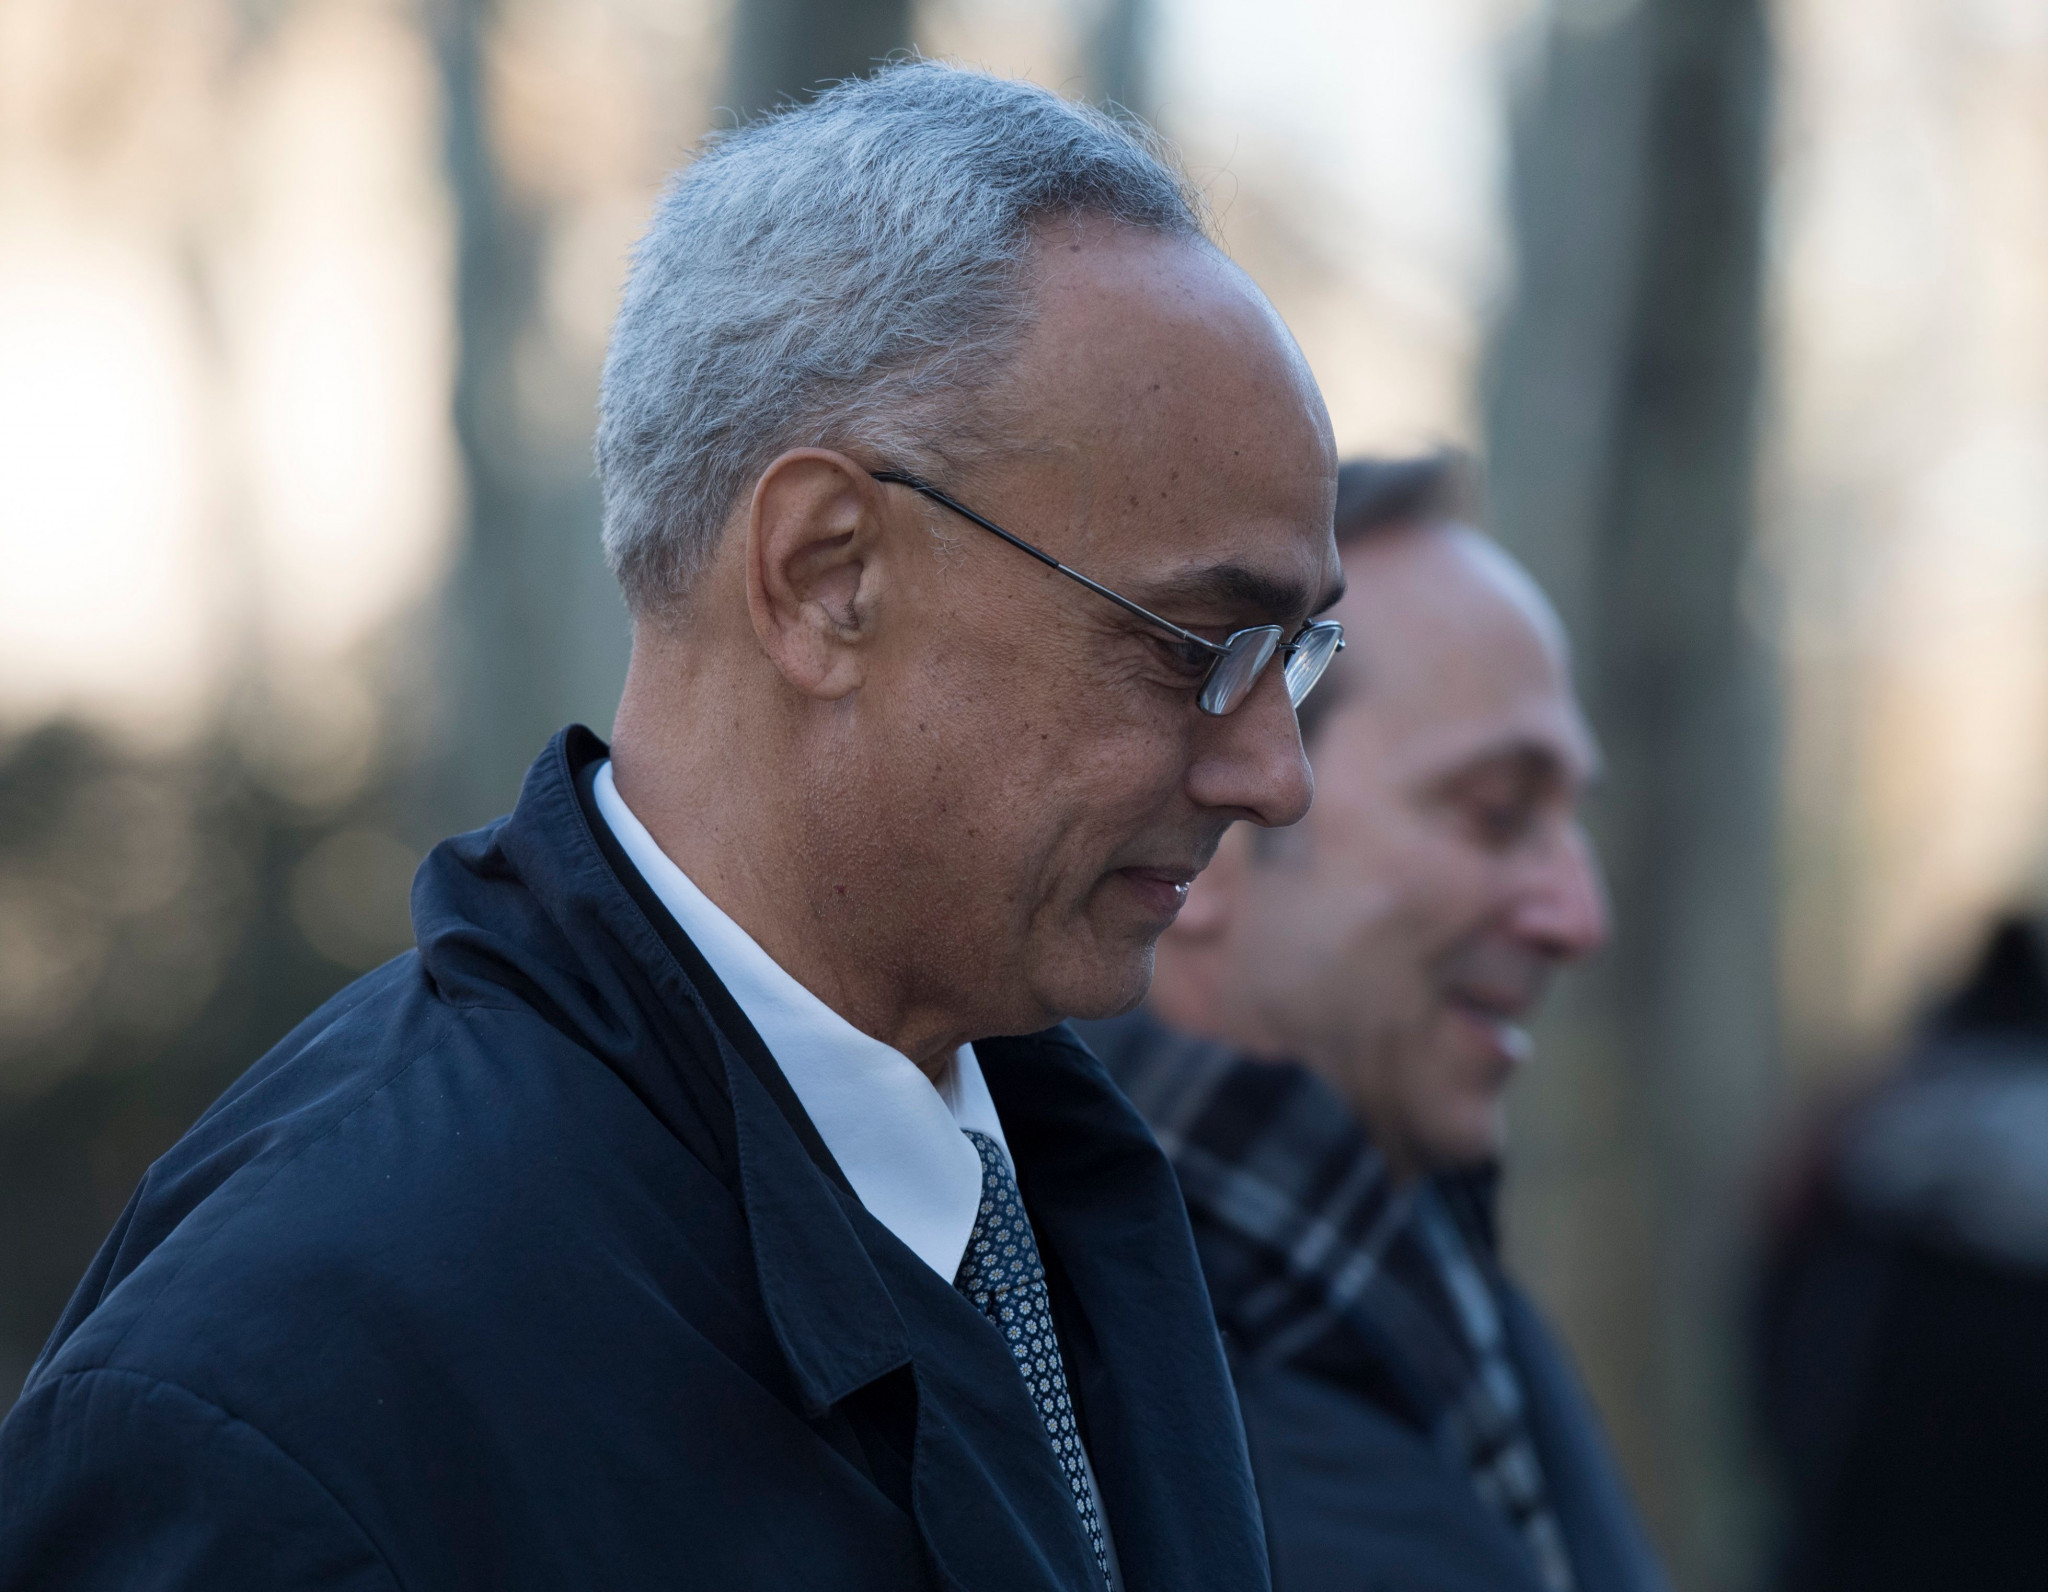 Manuel Burga was placed under house arrest after allegedly making cut-throat gestures to Alejandro Burzaco, a Government witness in the trial ©Getty Images